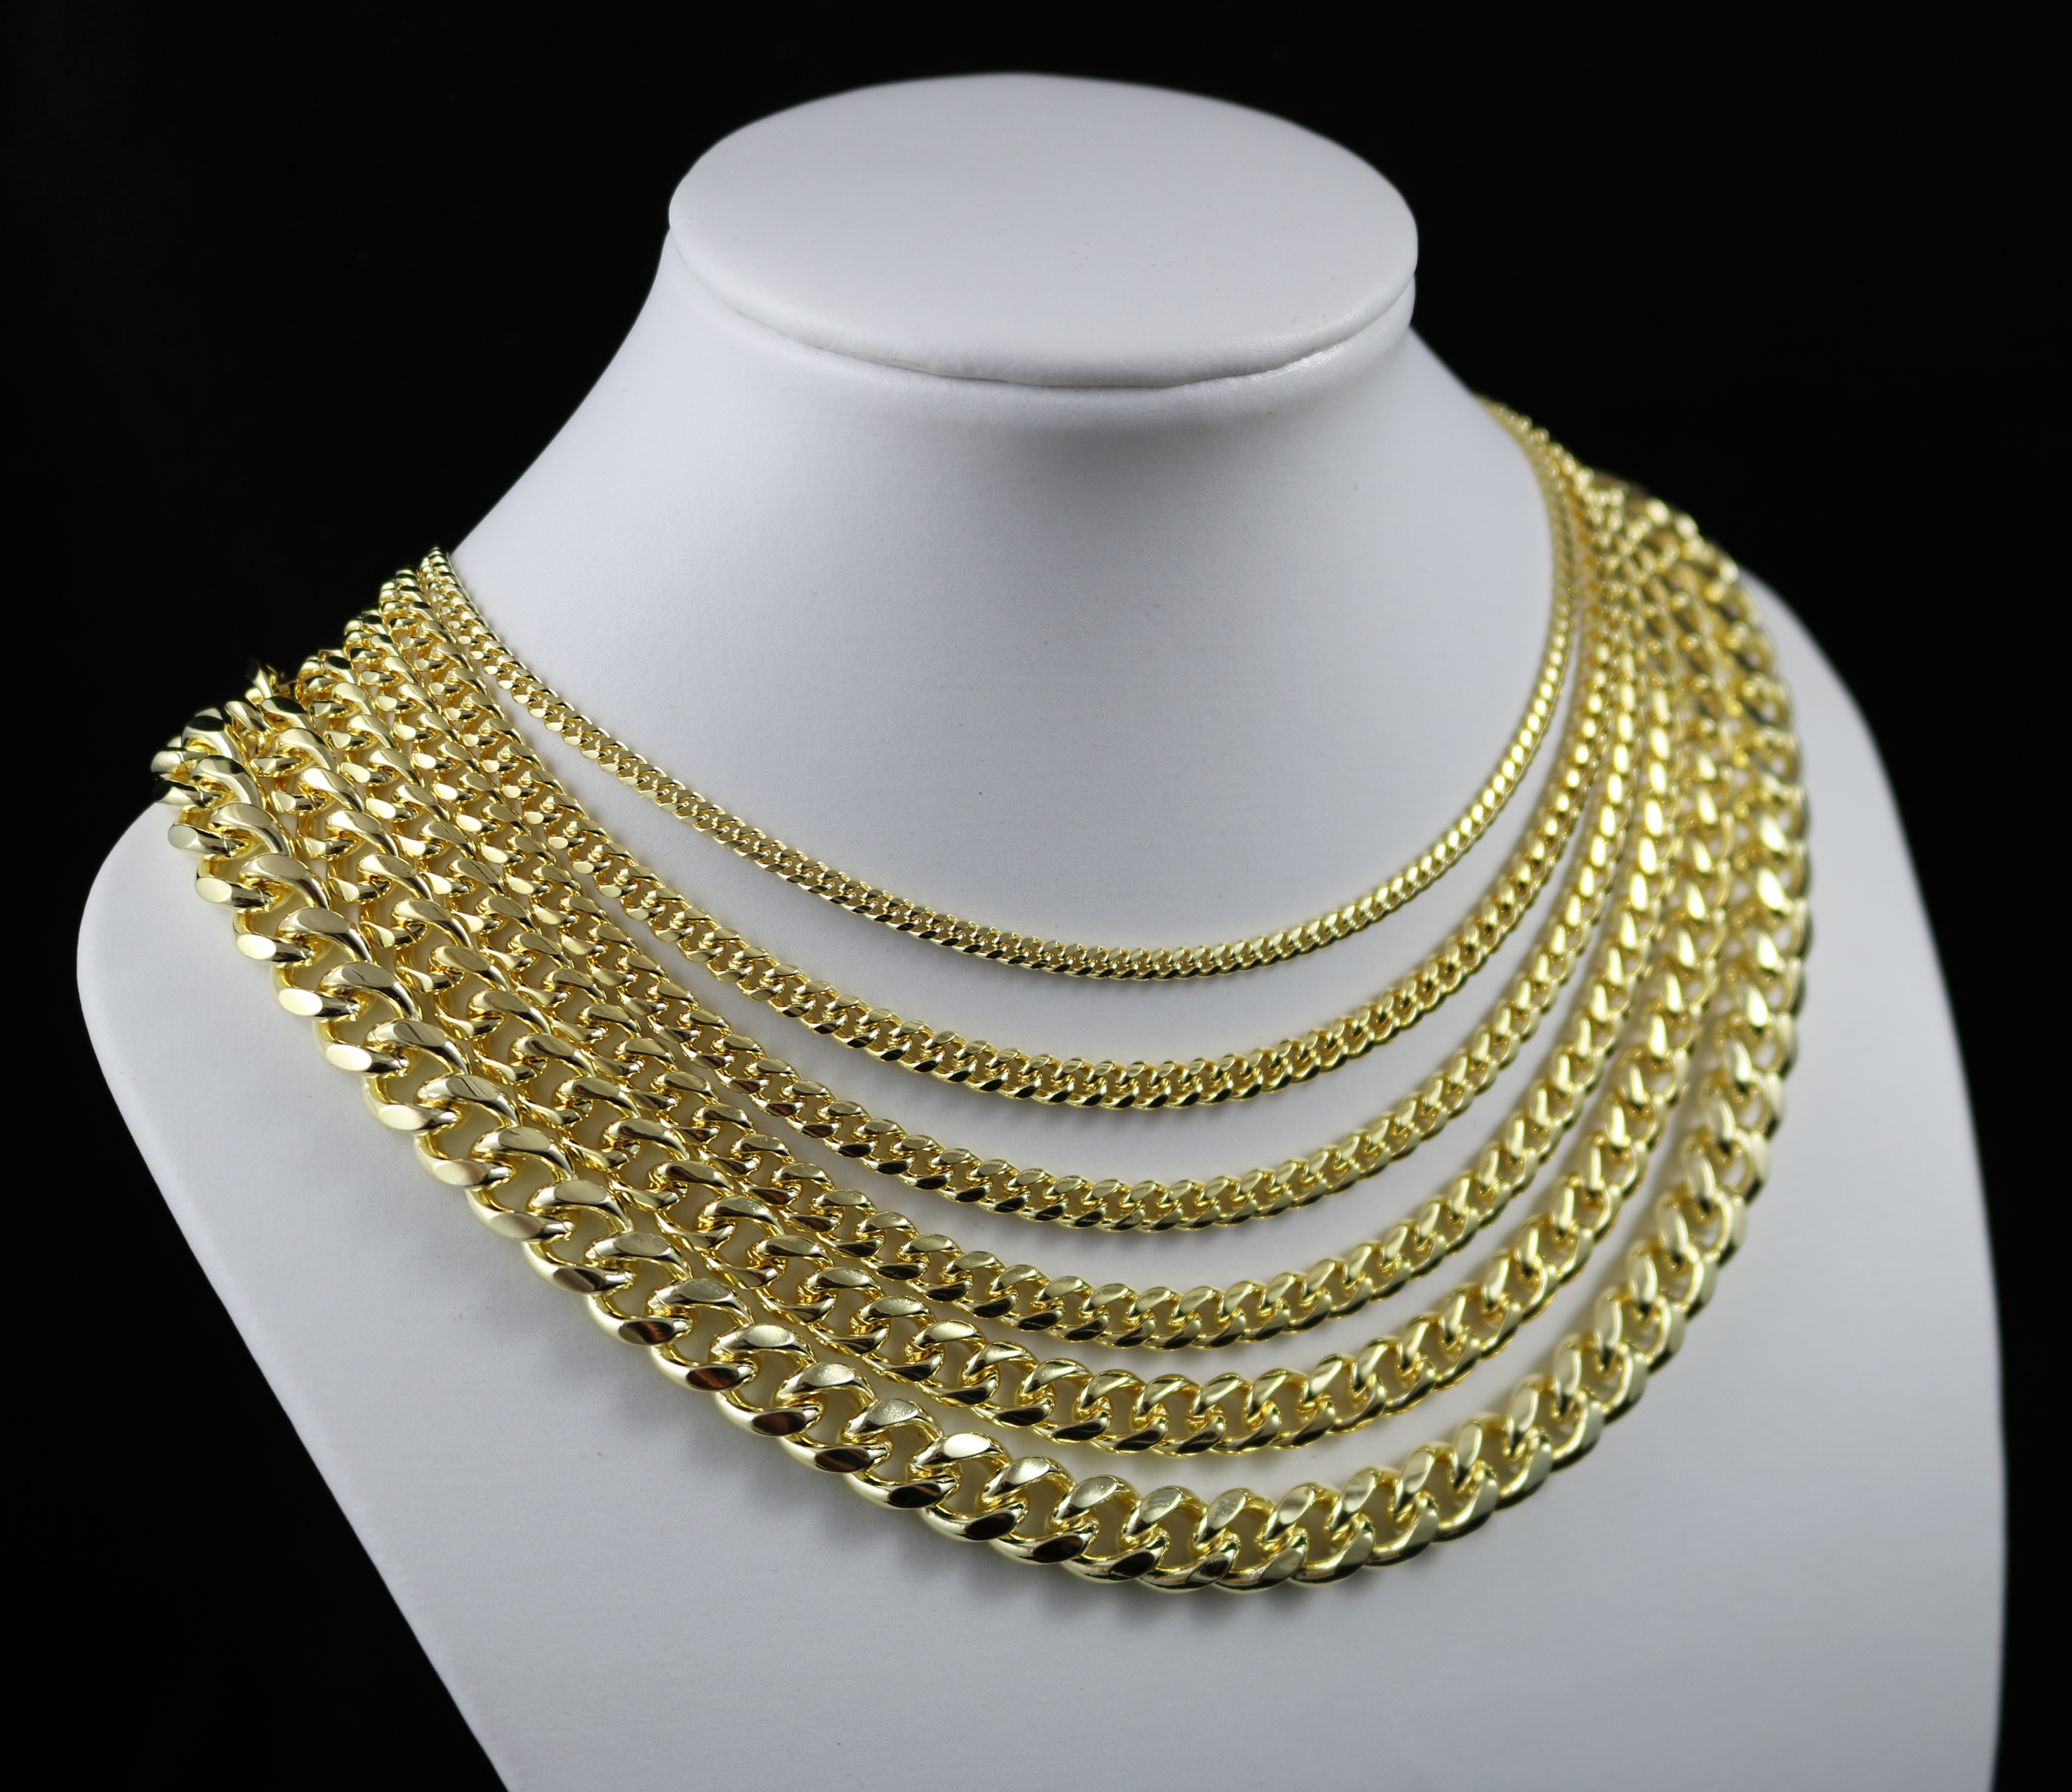 18K Gold Plated 14 mm Cuban Curb Link Chain Necklace 31" Long 